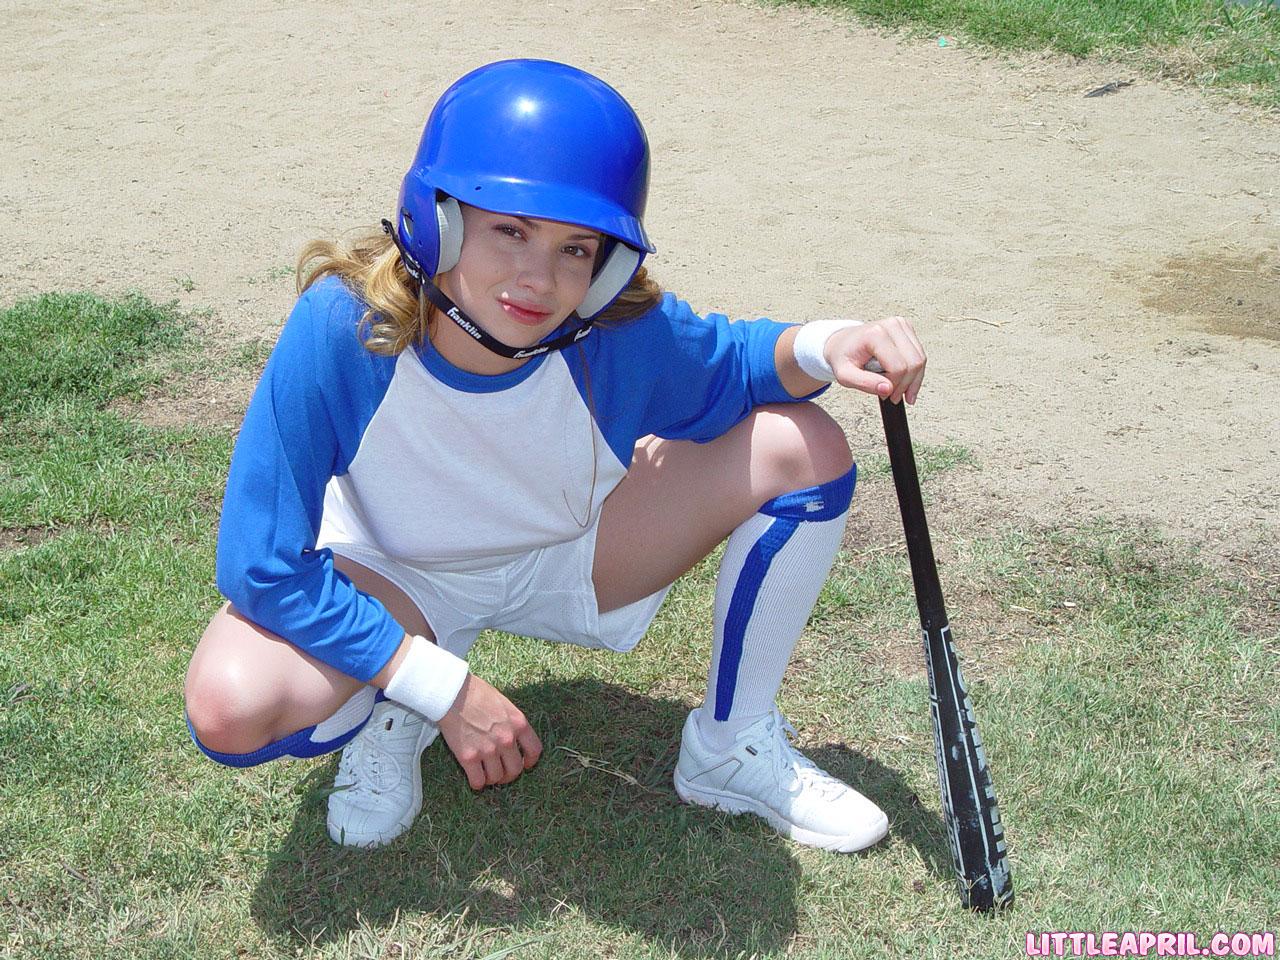 Pictures of Little April masturbating after a game of baseball #58993649